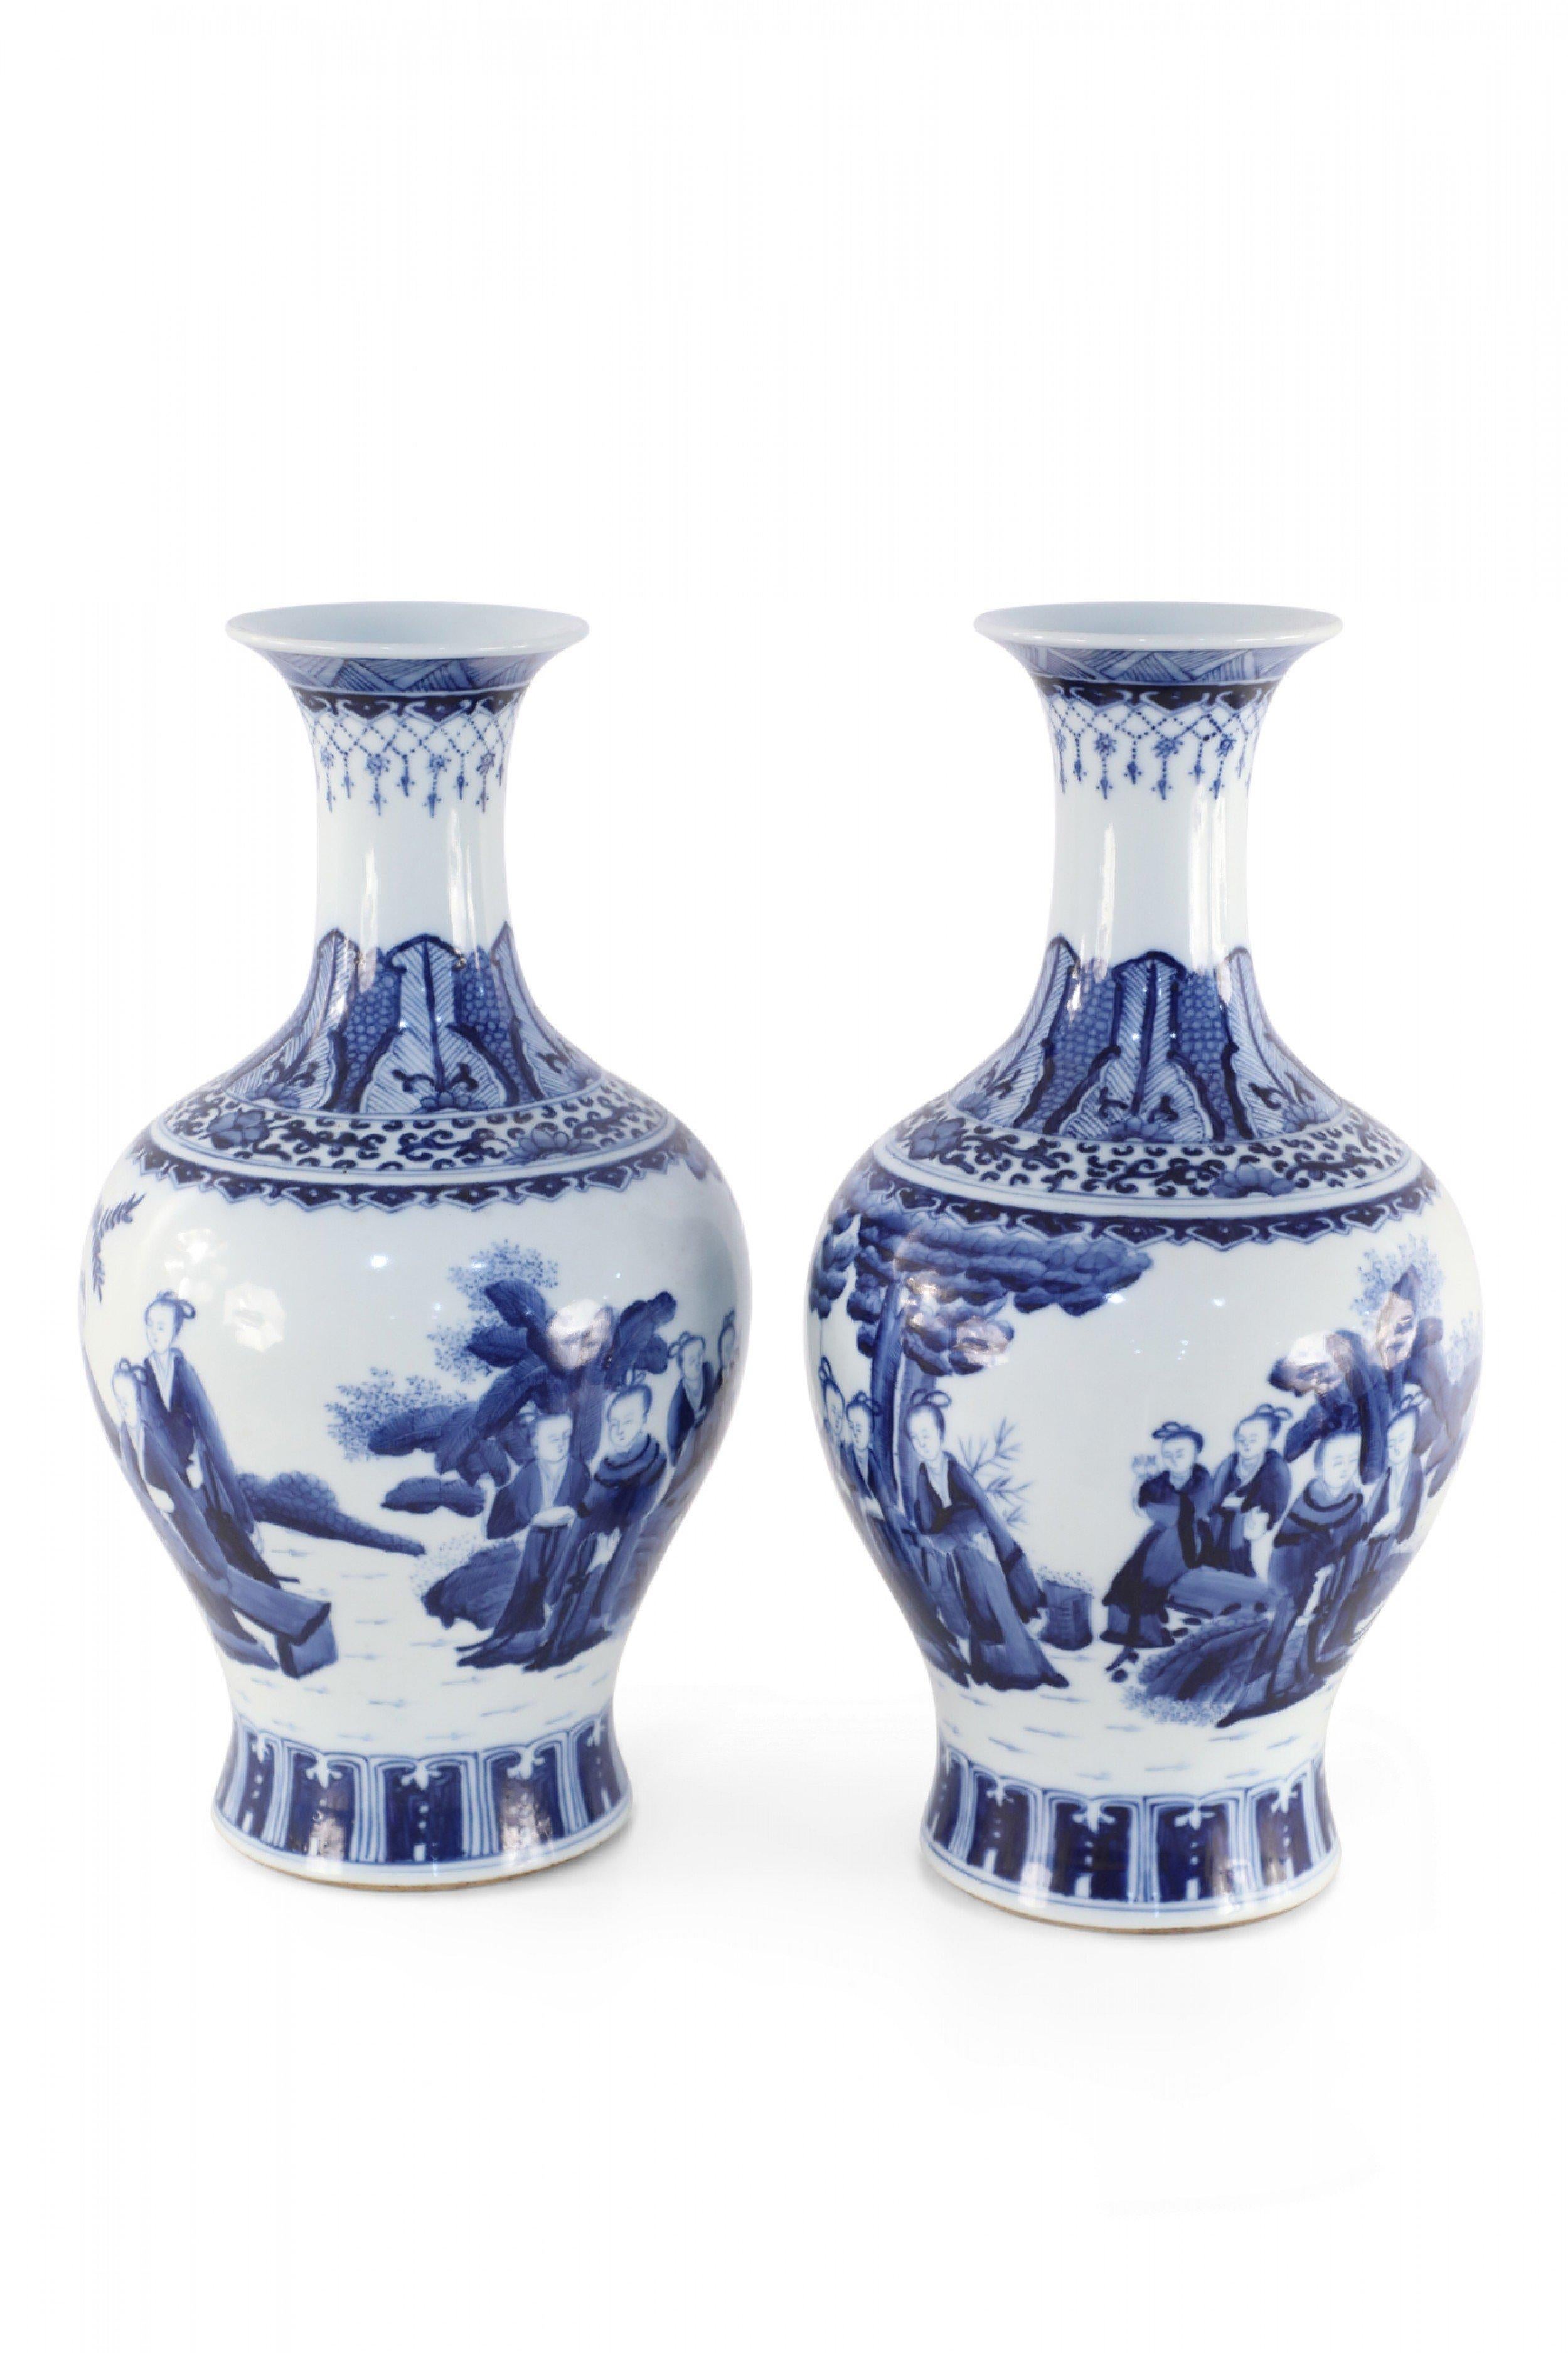 Pair of Chinese Qing Dynasty White and Blue Figurative Scene Porcelain Vases 2